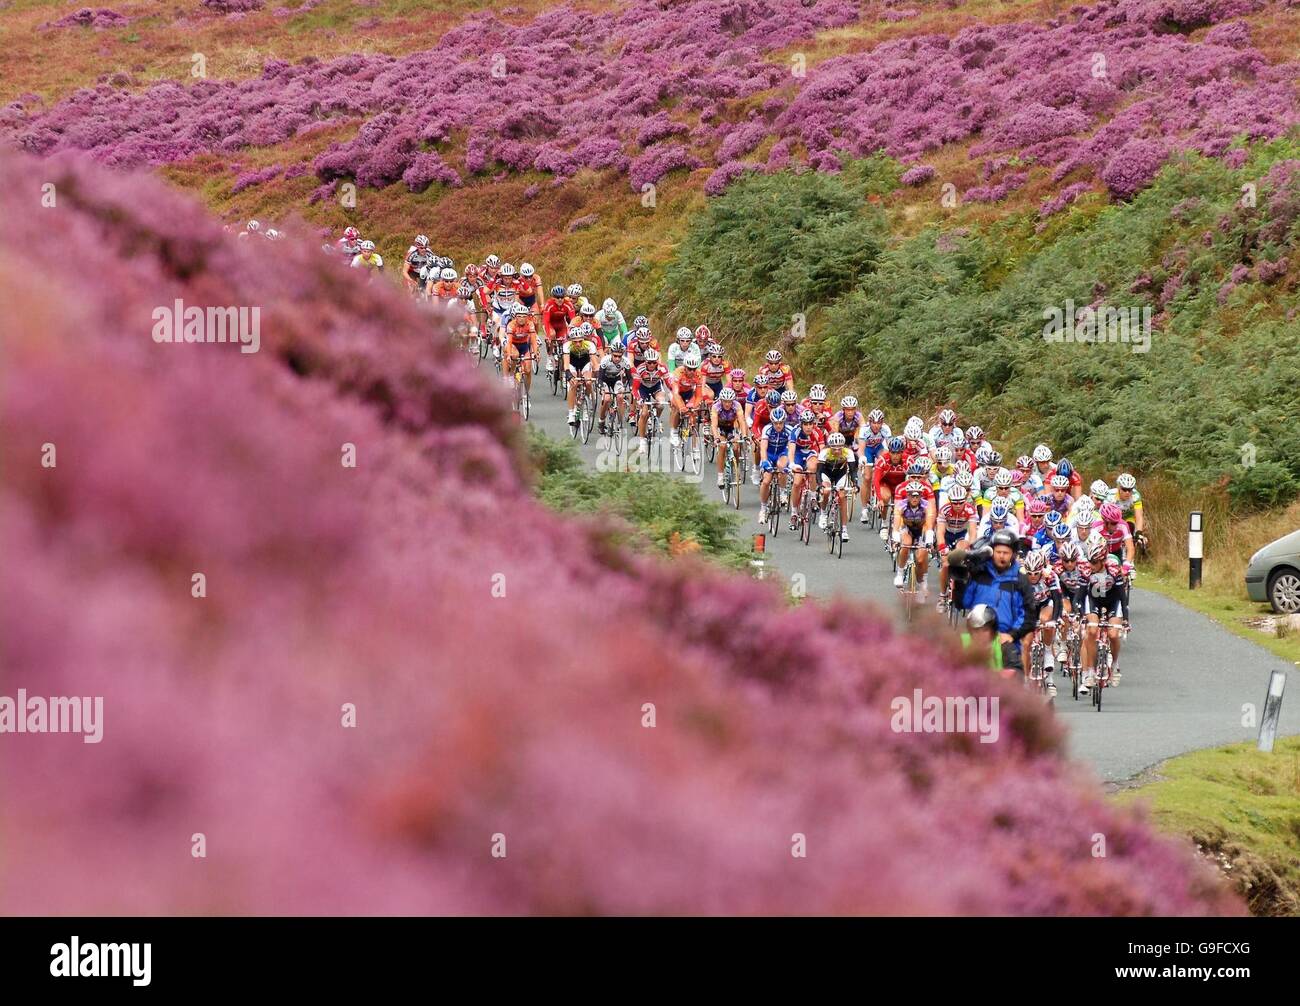 Cycling - Tour of Britain - Day. The moors are ablaze with purple heather as riders in the Tour of Britain Cycle Race climb through the Trough of Bowland near Preston today. Stock Photo